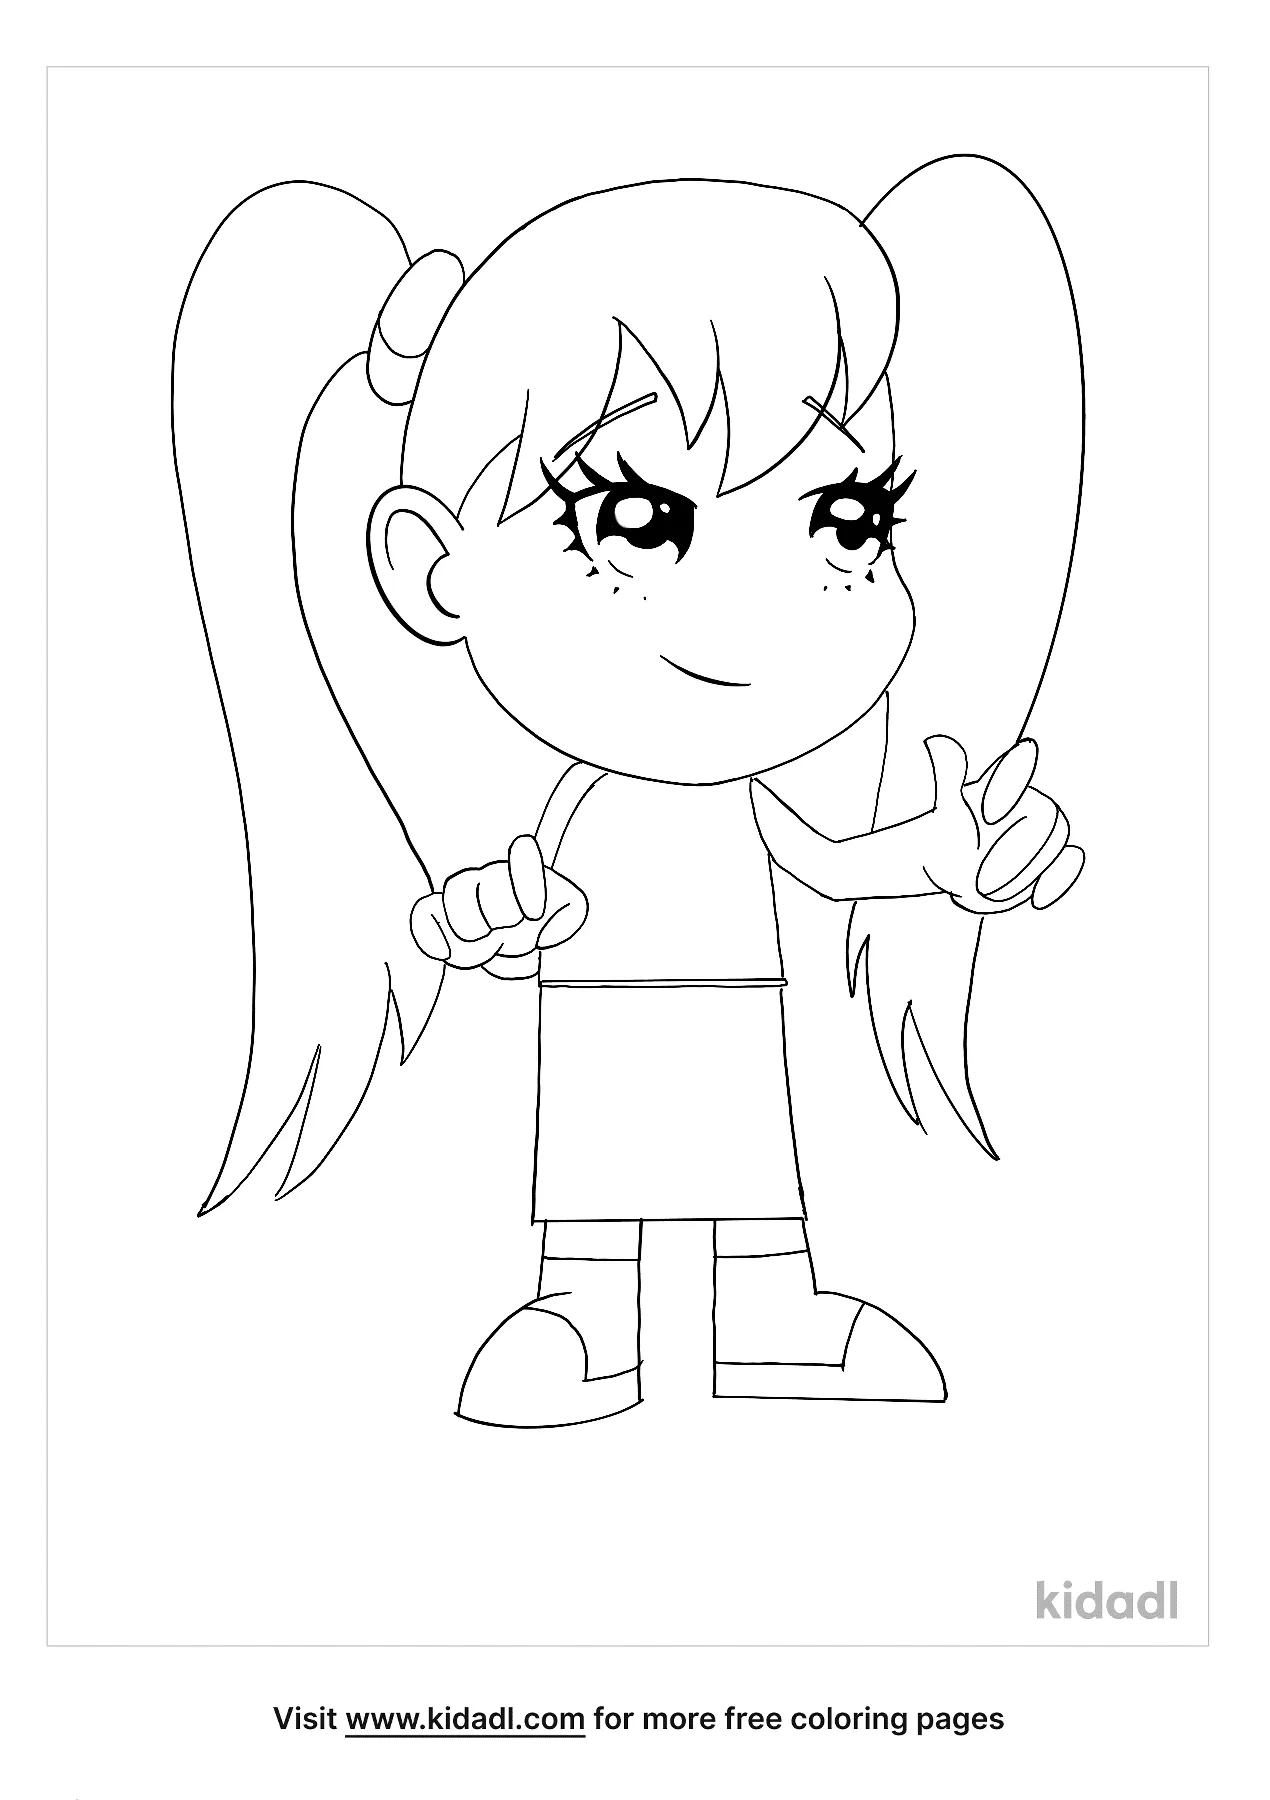 Free Cute Anime Girl Coloring Page | Coloring Page Printables | Kidadl